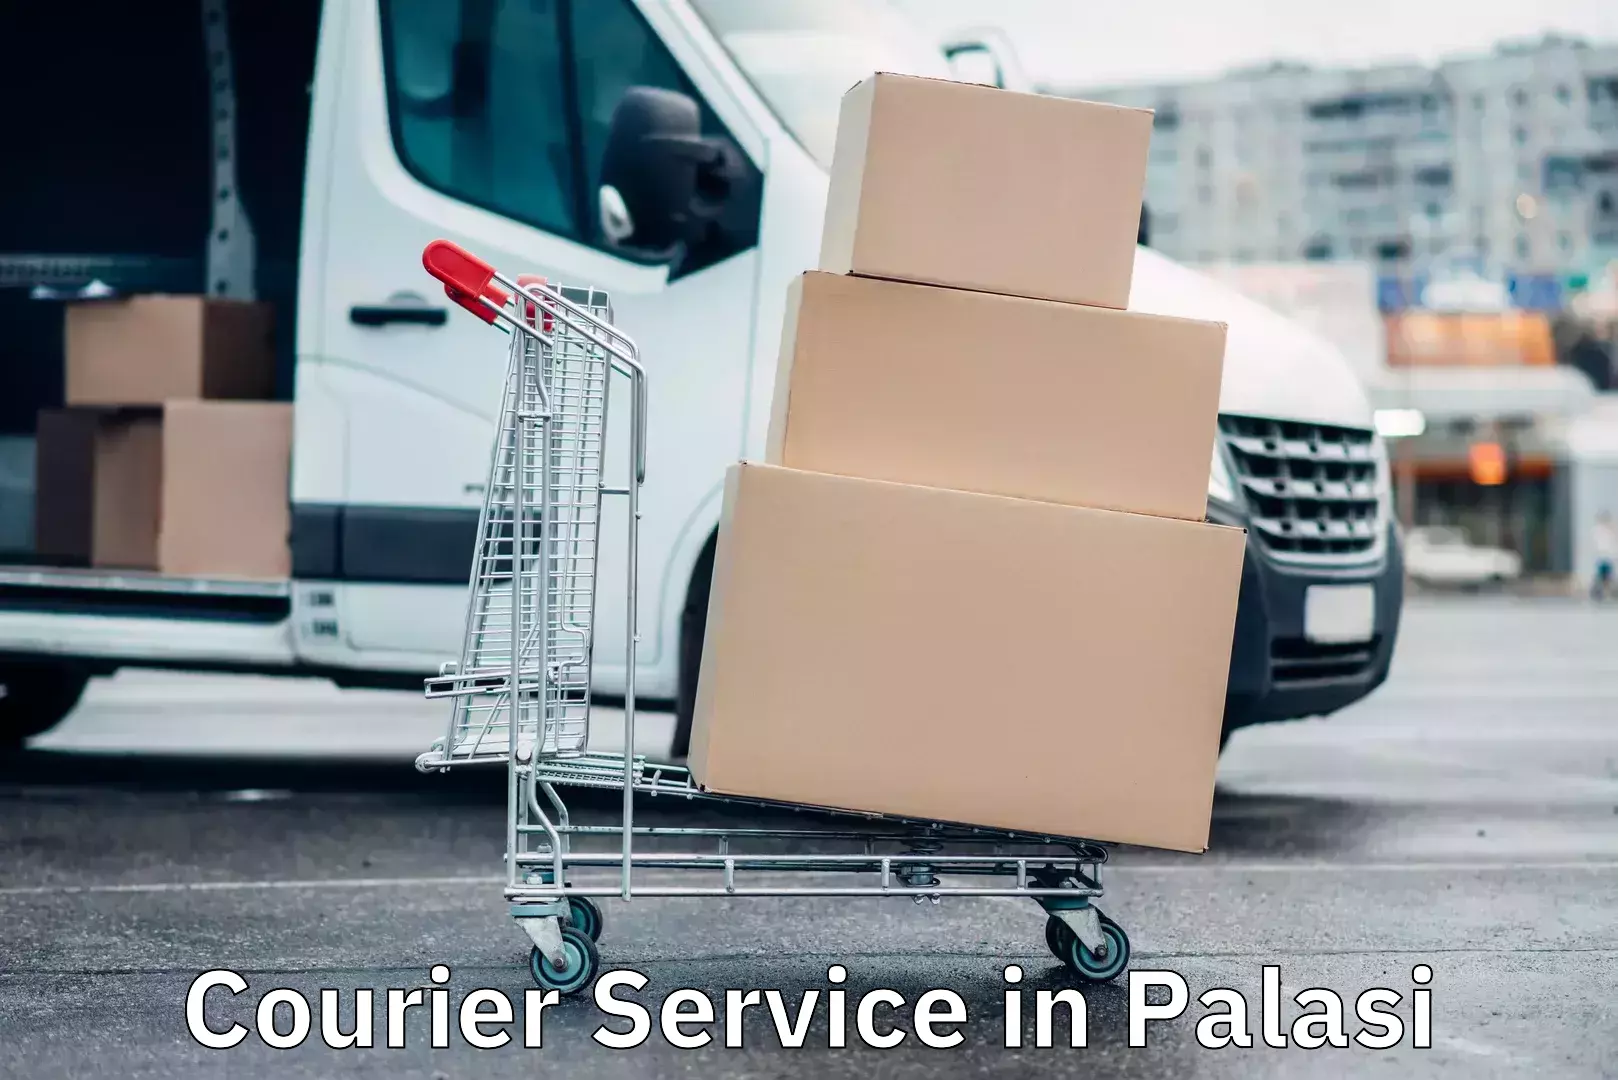 Express mail solutions in Palasi